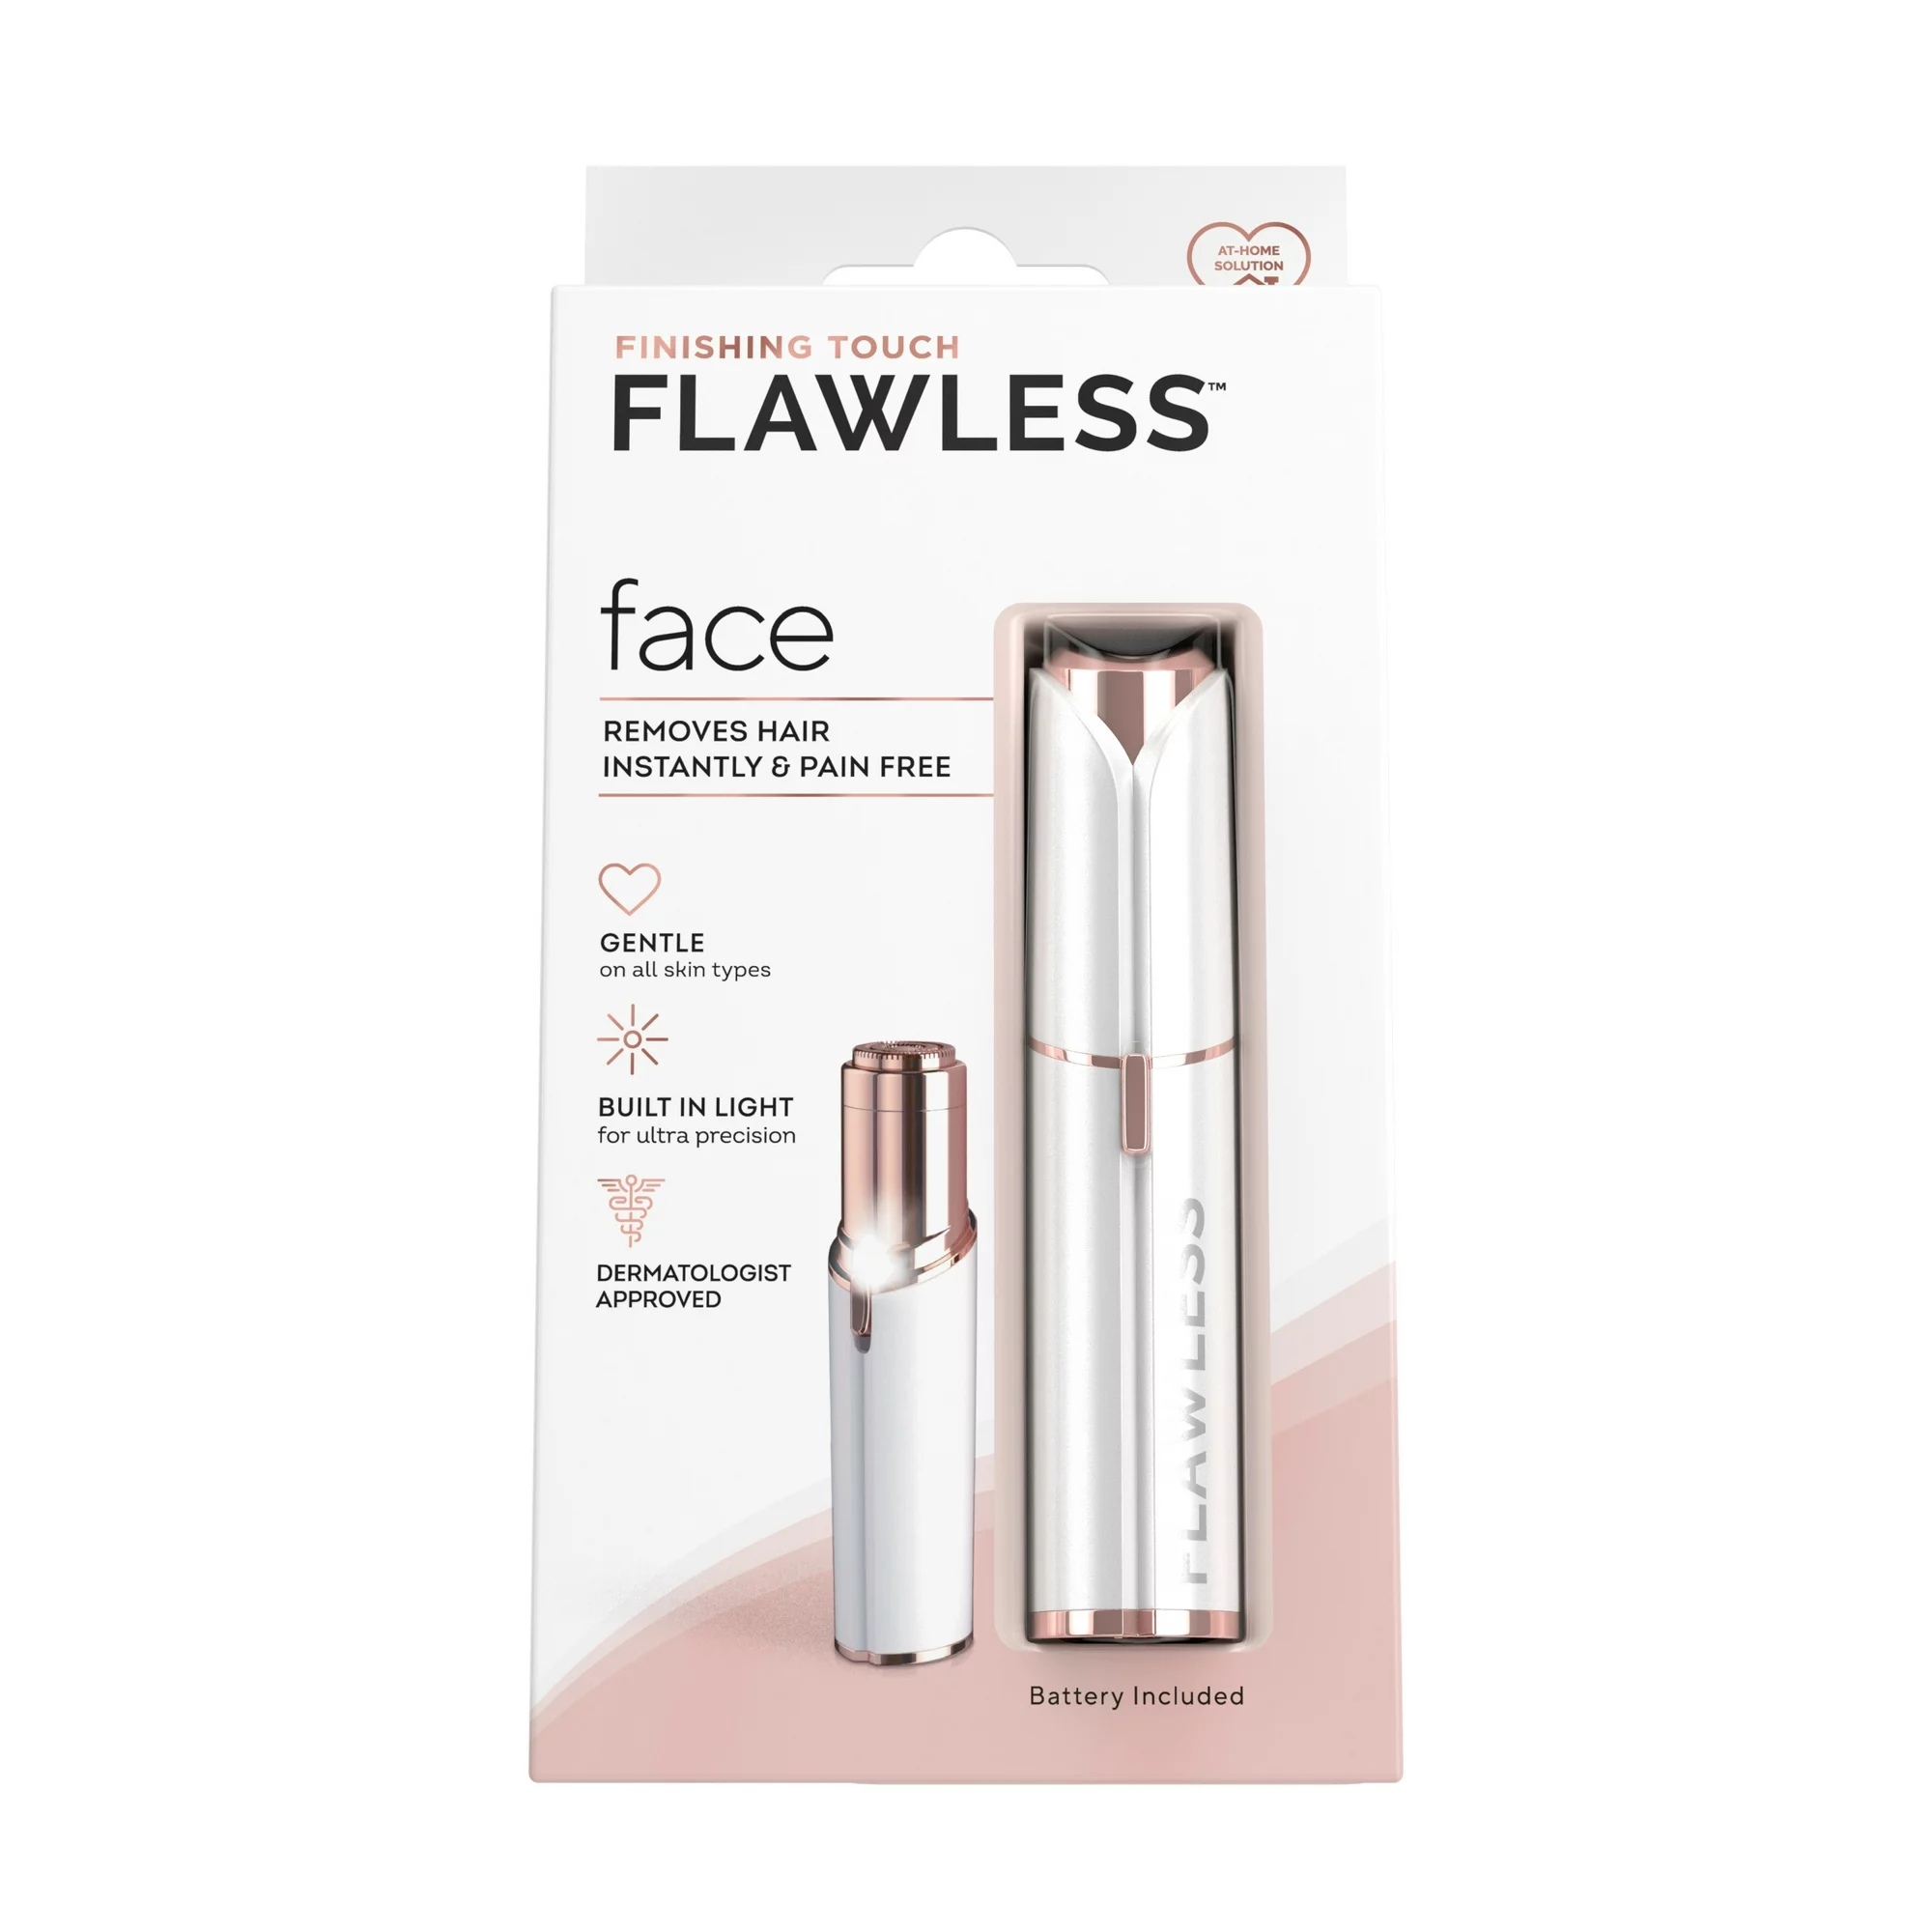 Finishing Touch Flawless Facial Hair Remover for Women, Electric Face Razor  for Women with LED Light for Instant and Painless Hair Removal, Blush 